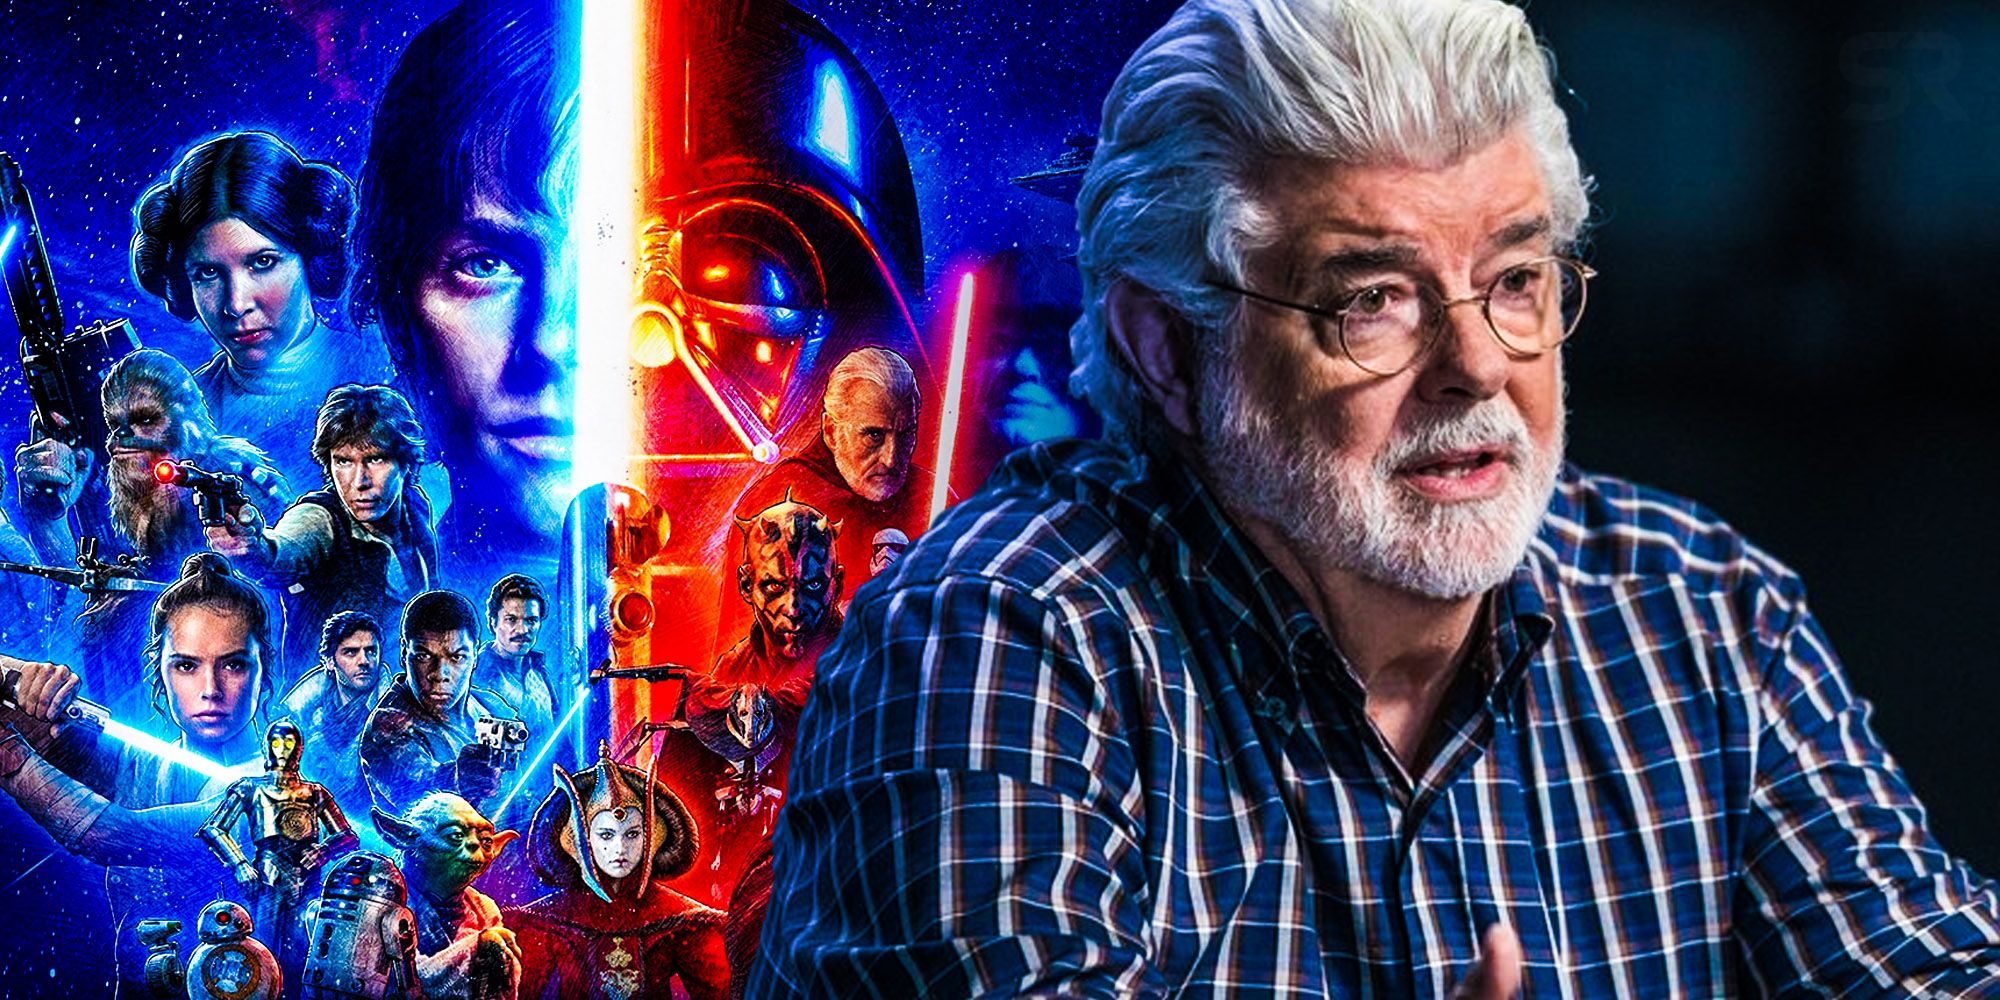 George Lucas and Star Wars characters